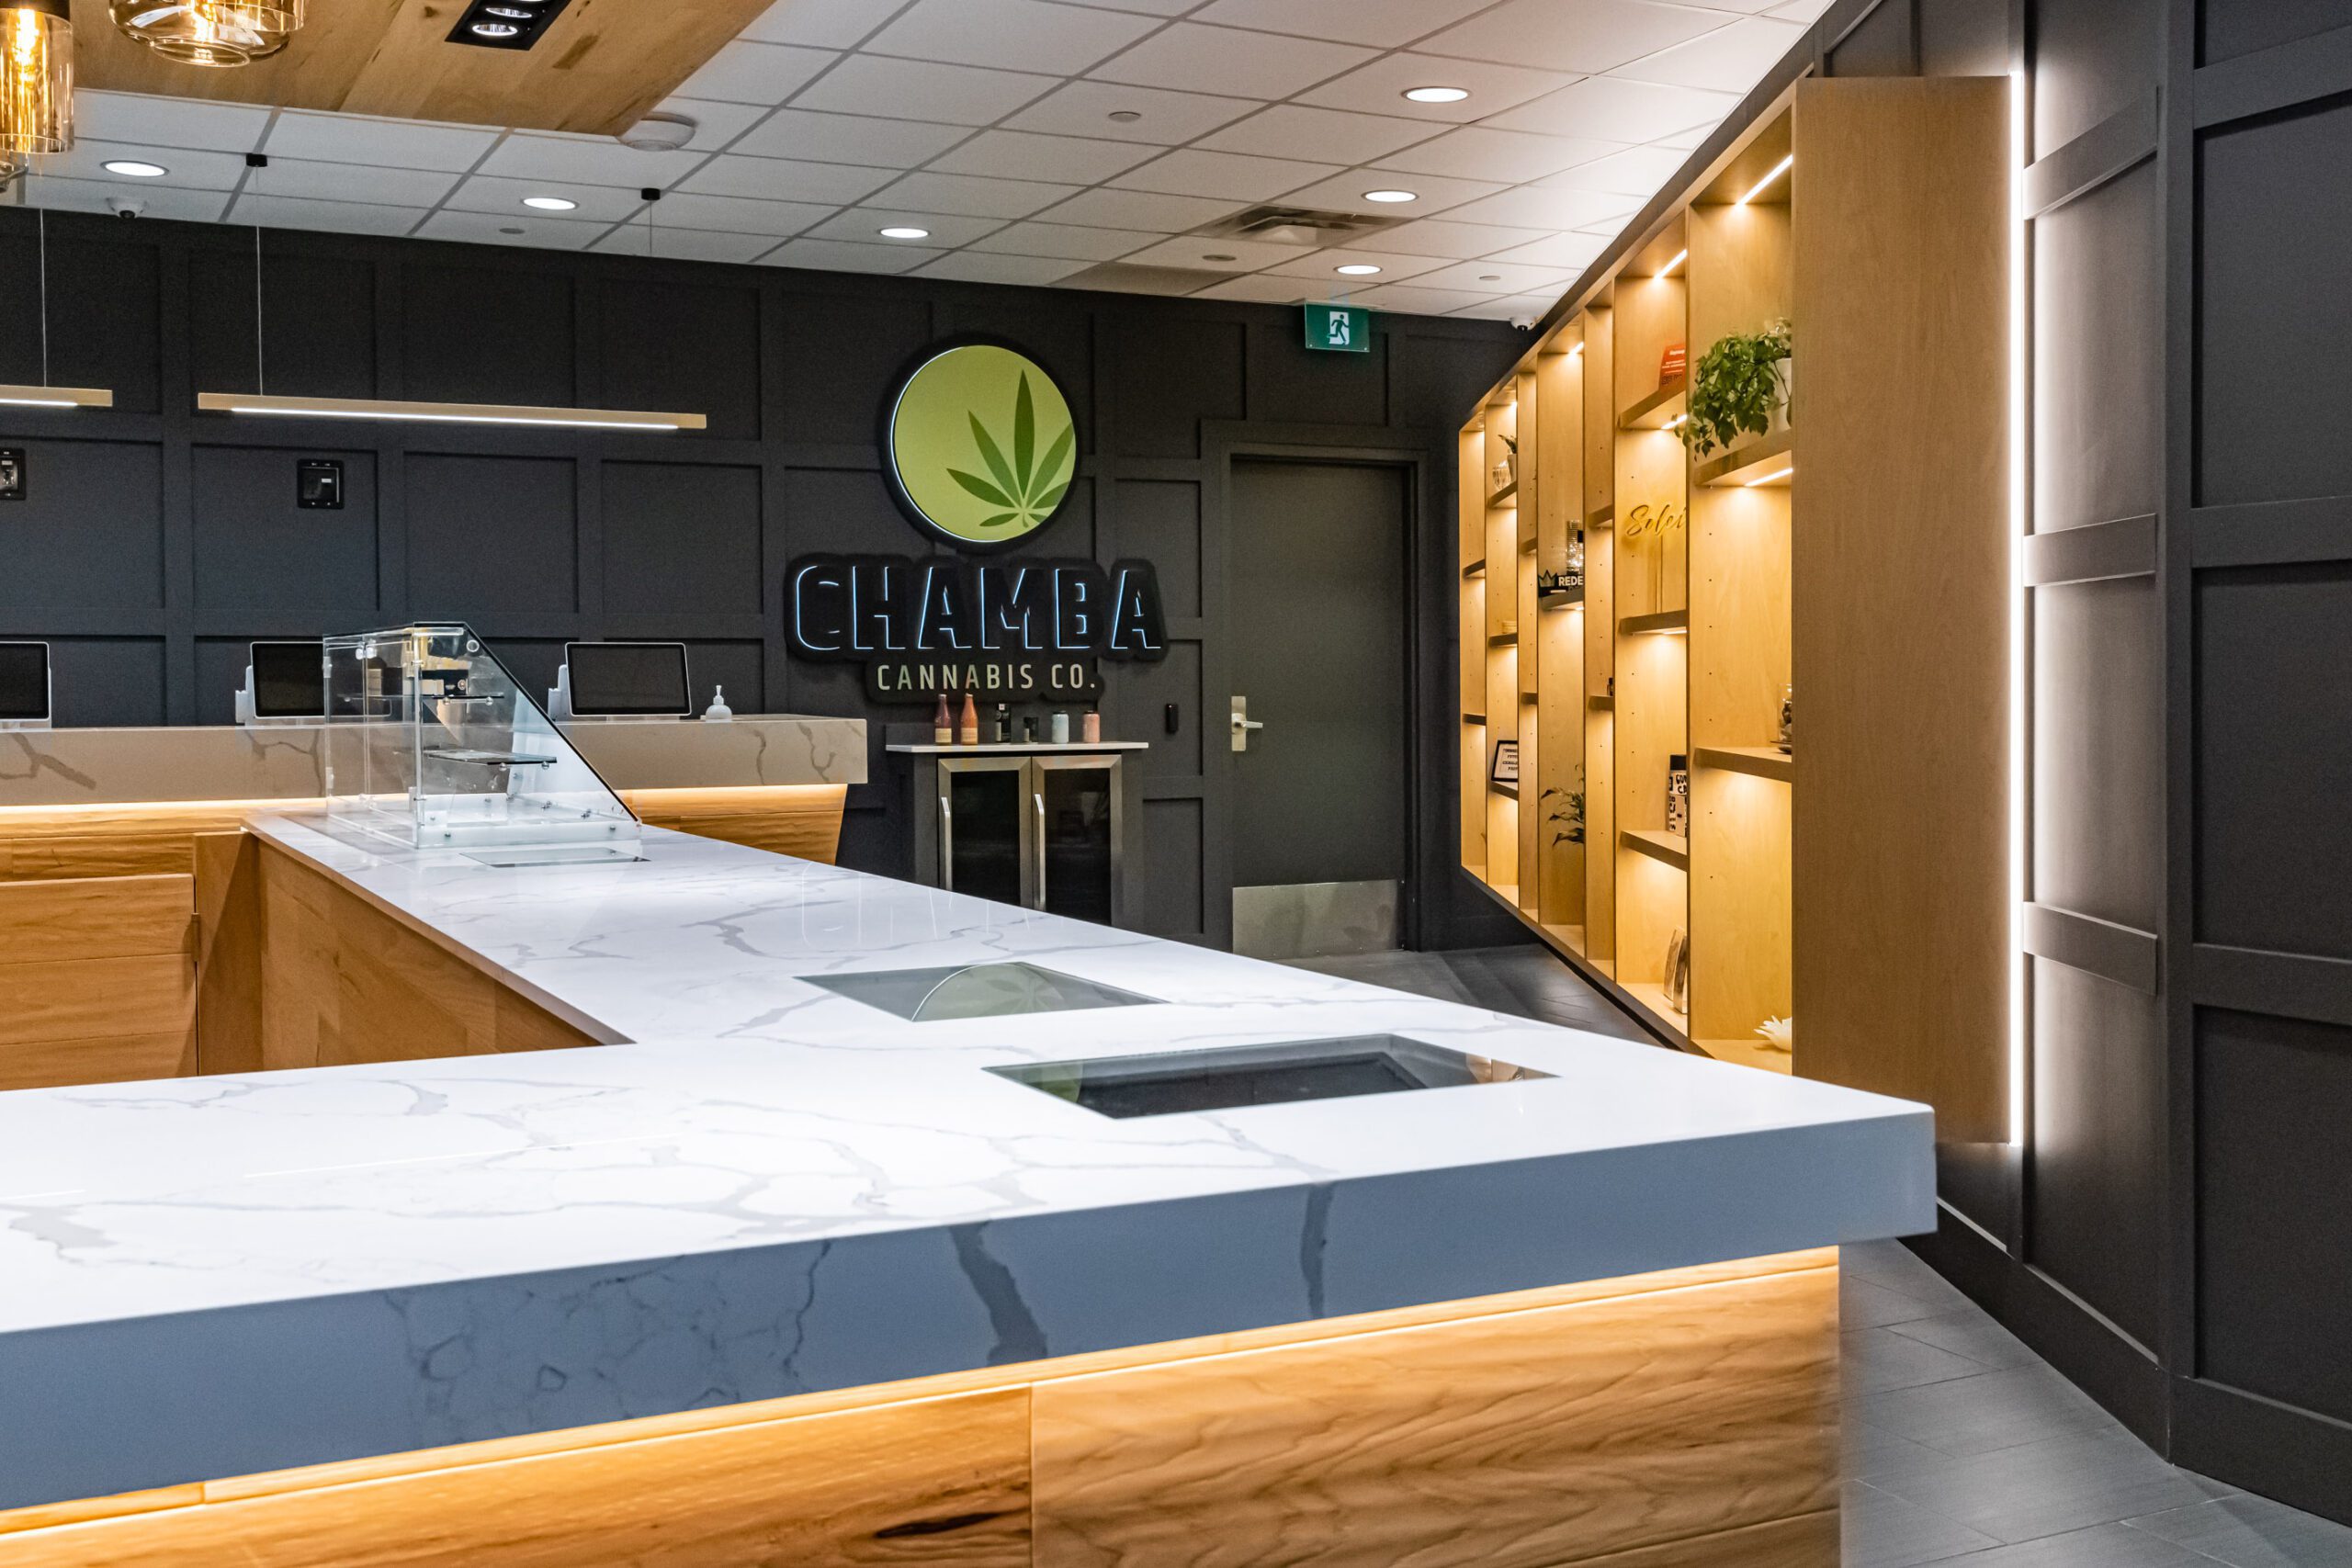 Counter display area at Chamba Cannabis Co. Waterloo store with modern design and lighting.